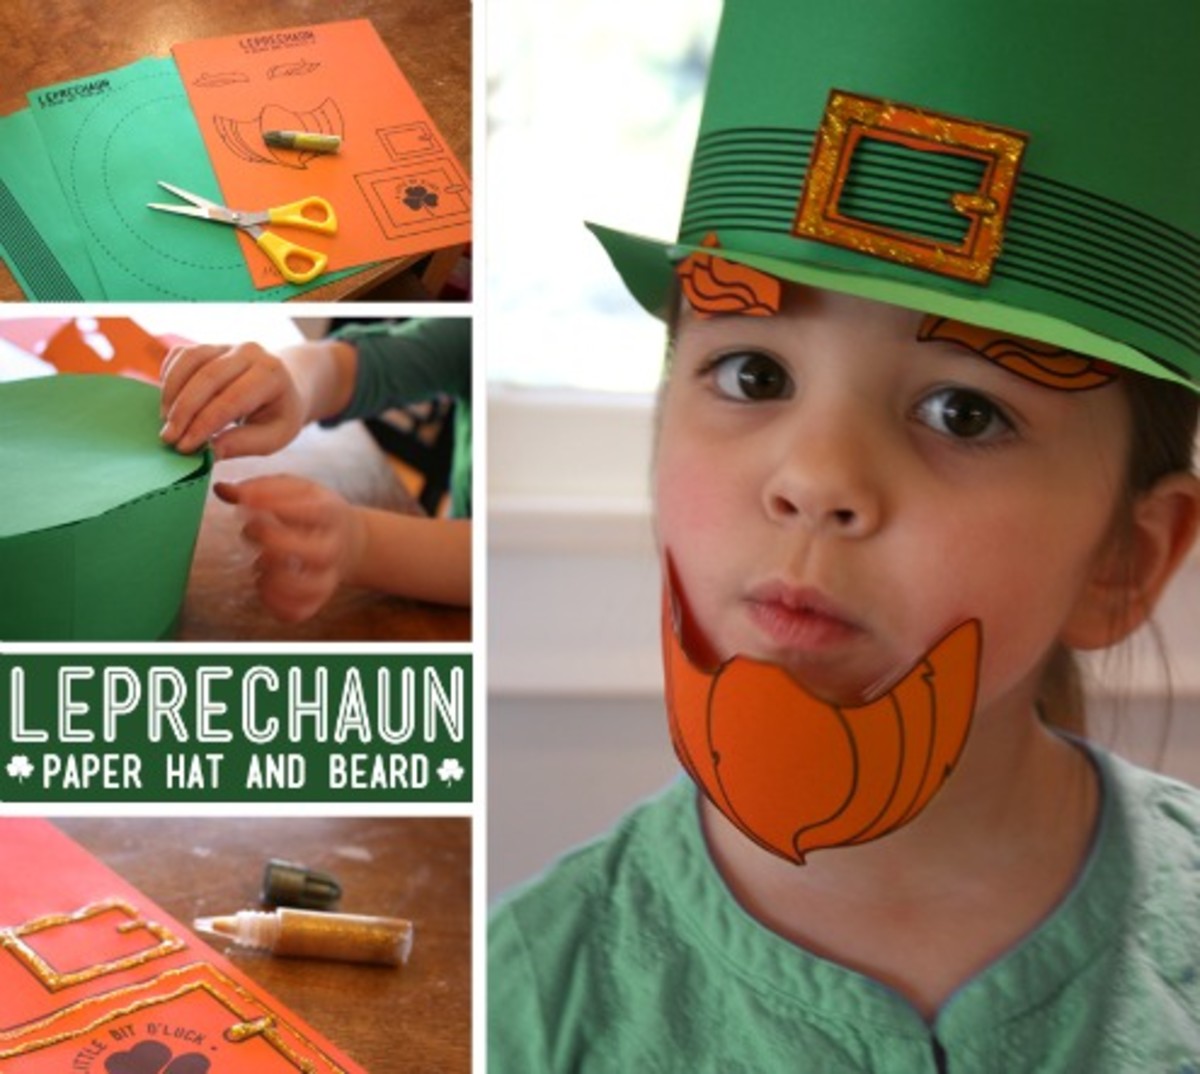 Printable template for a paper hat and beard for a leprechaun costume.